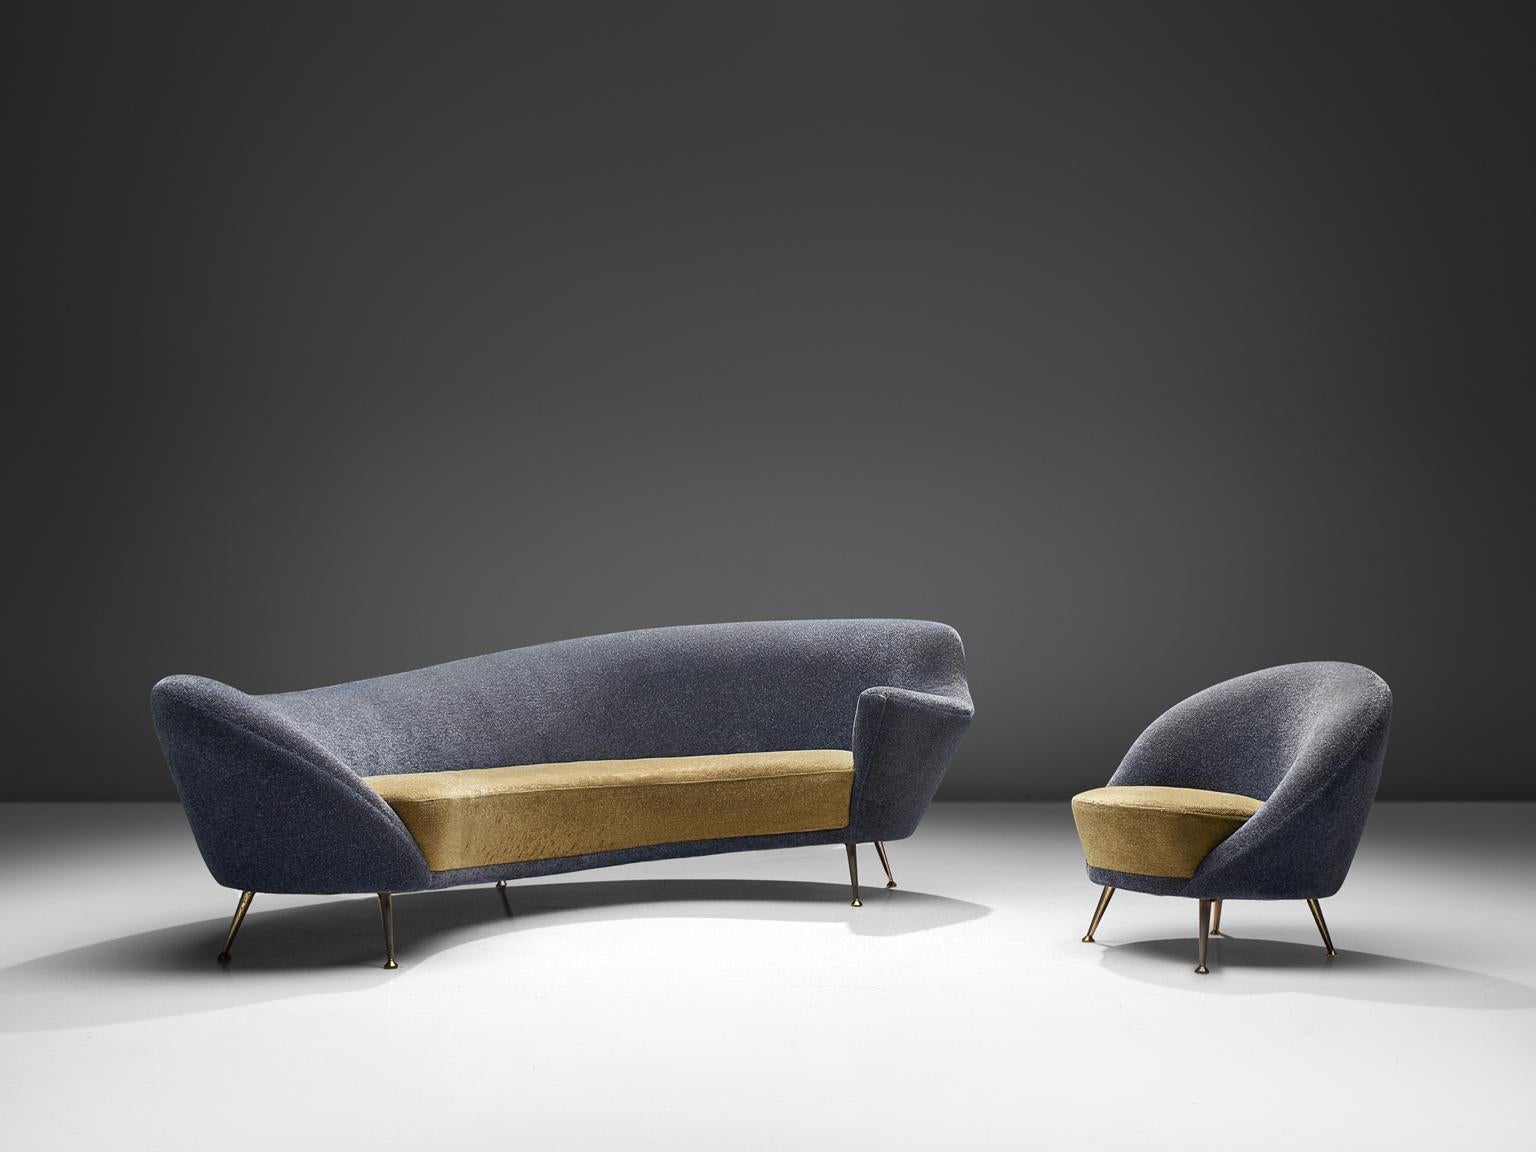 Curved sofa and easy chair, yellow and blue fabric, brass, Italy, 1950s.

This elegant set features a dynamic sofa with an a-symmetrical back and a club chair. The back of the sofa is higher on the right side and slowly slopes towards much lower